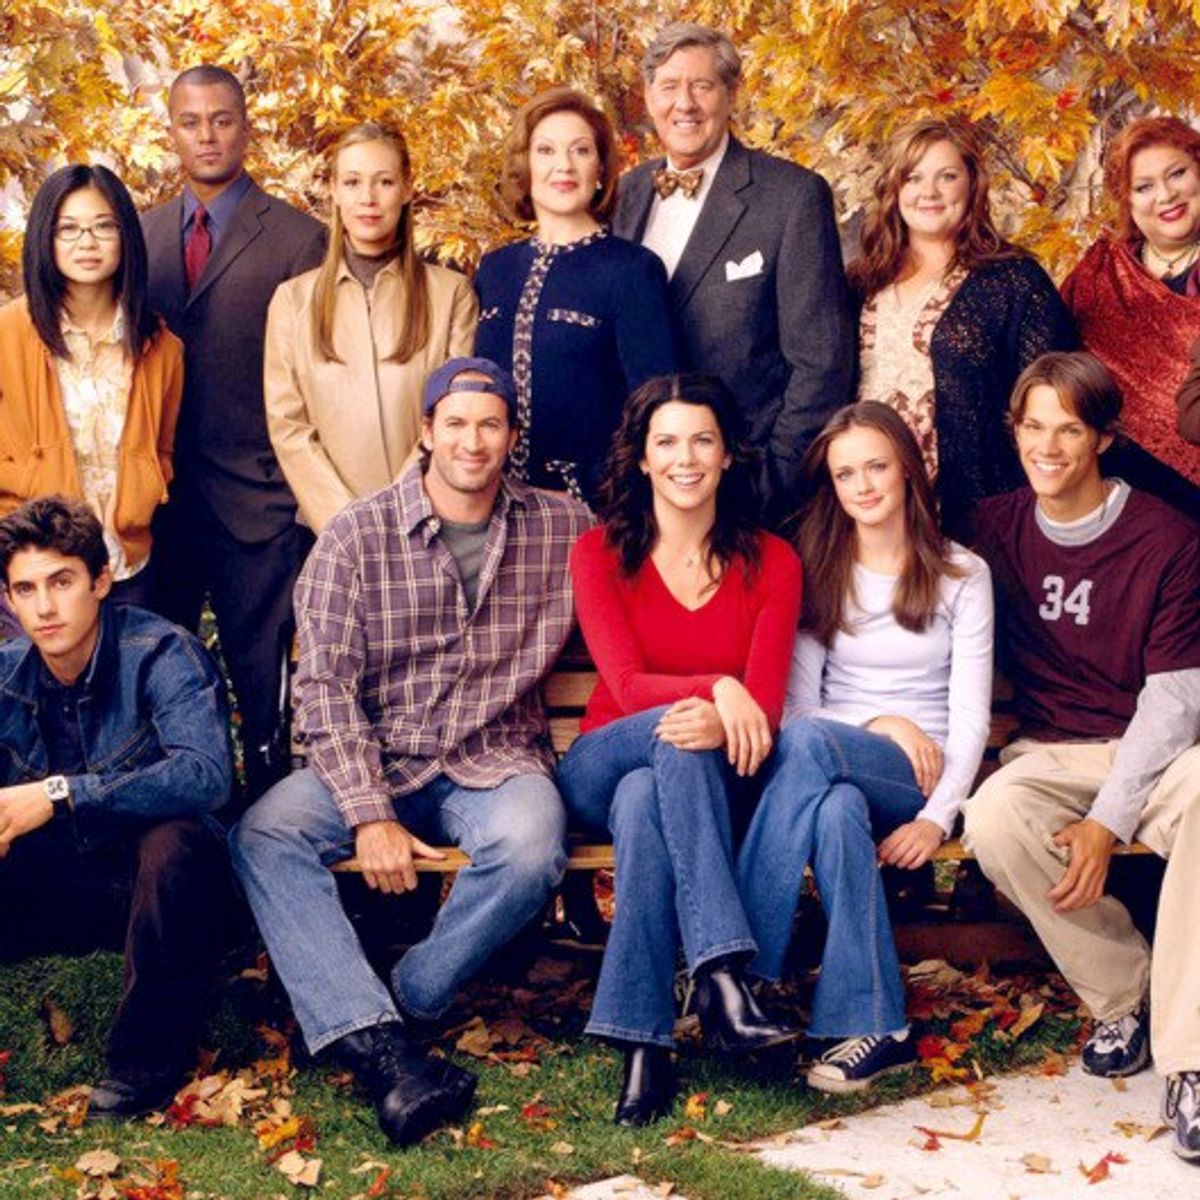 The "Gilmore Girls" Return: Hopes And Fears